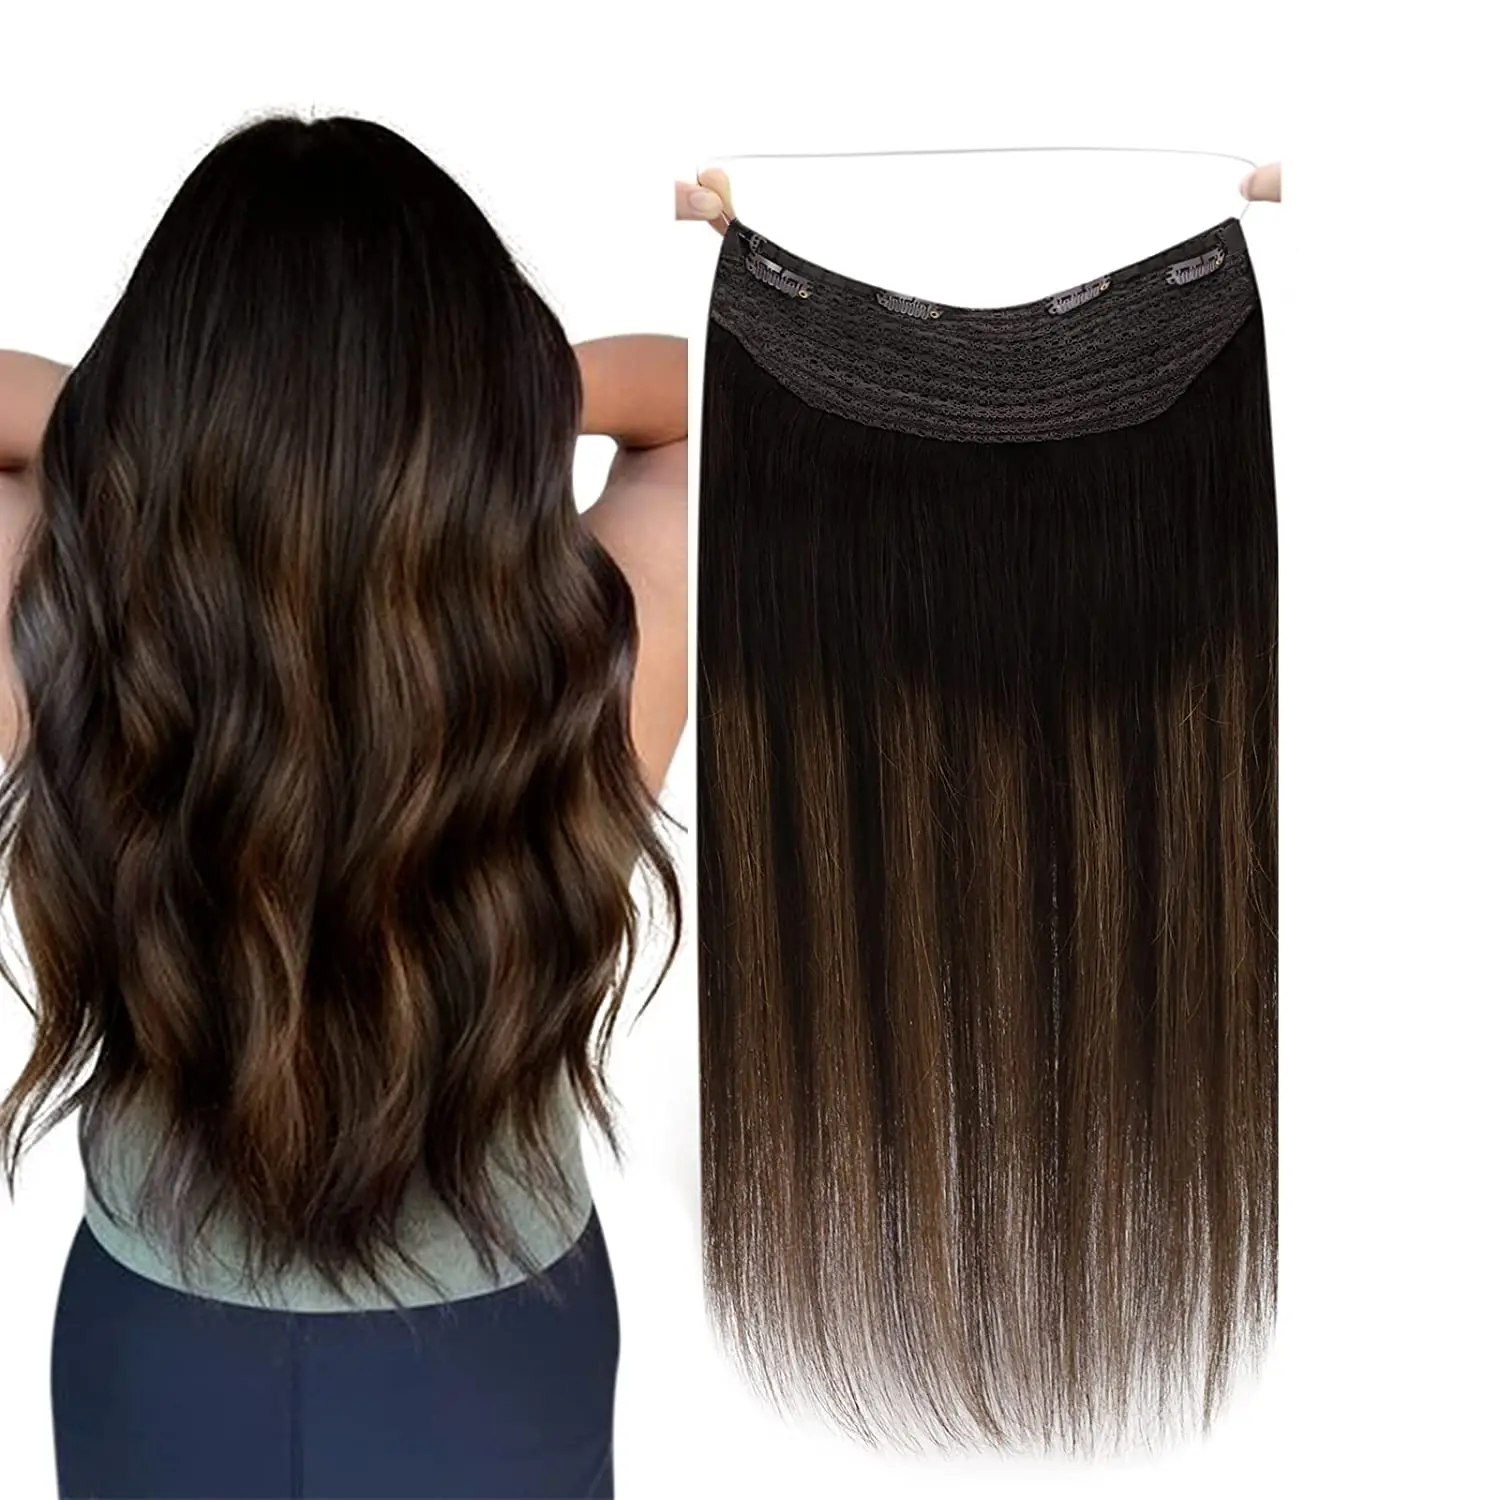 Elite Long Halo Hair Extensions Invisible Wire Hair Piece 18 inches and easy to install